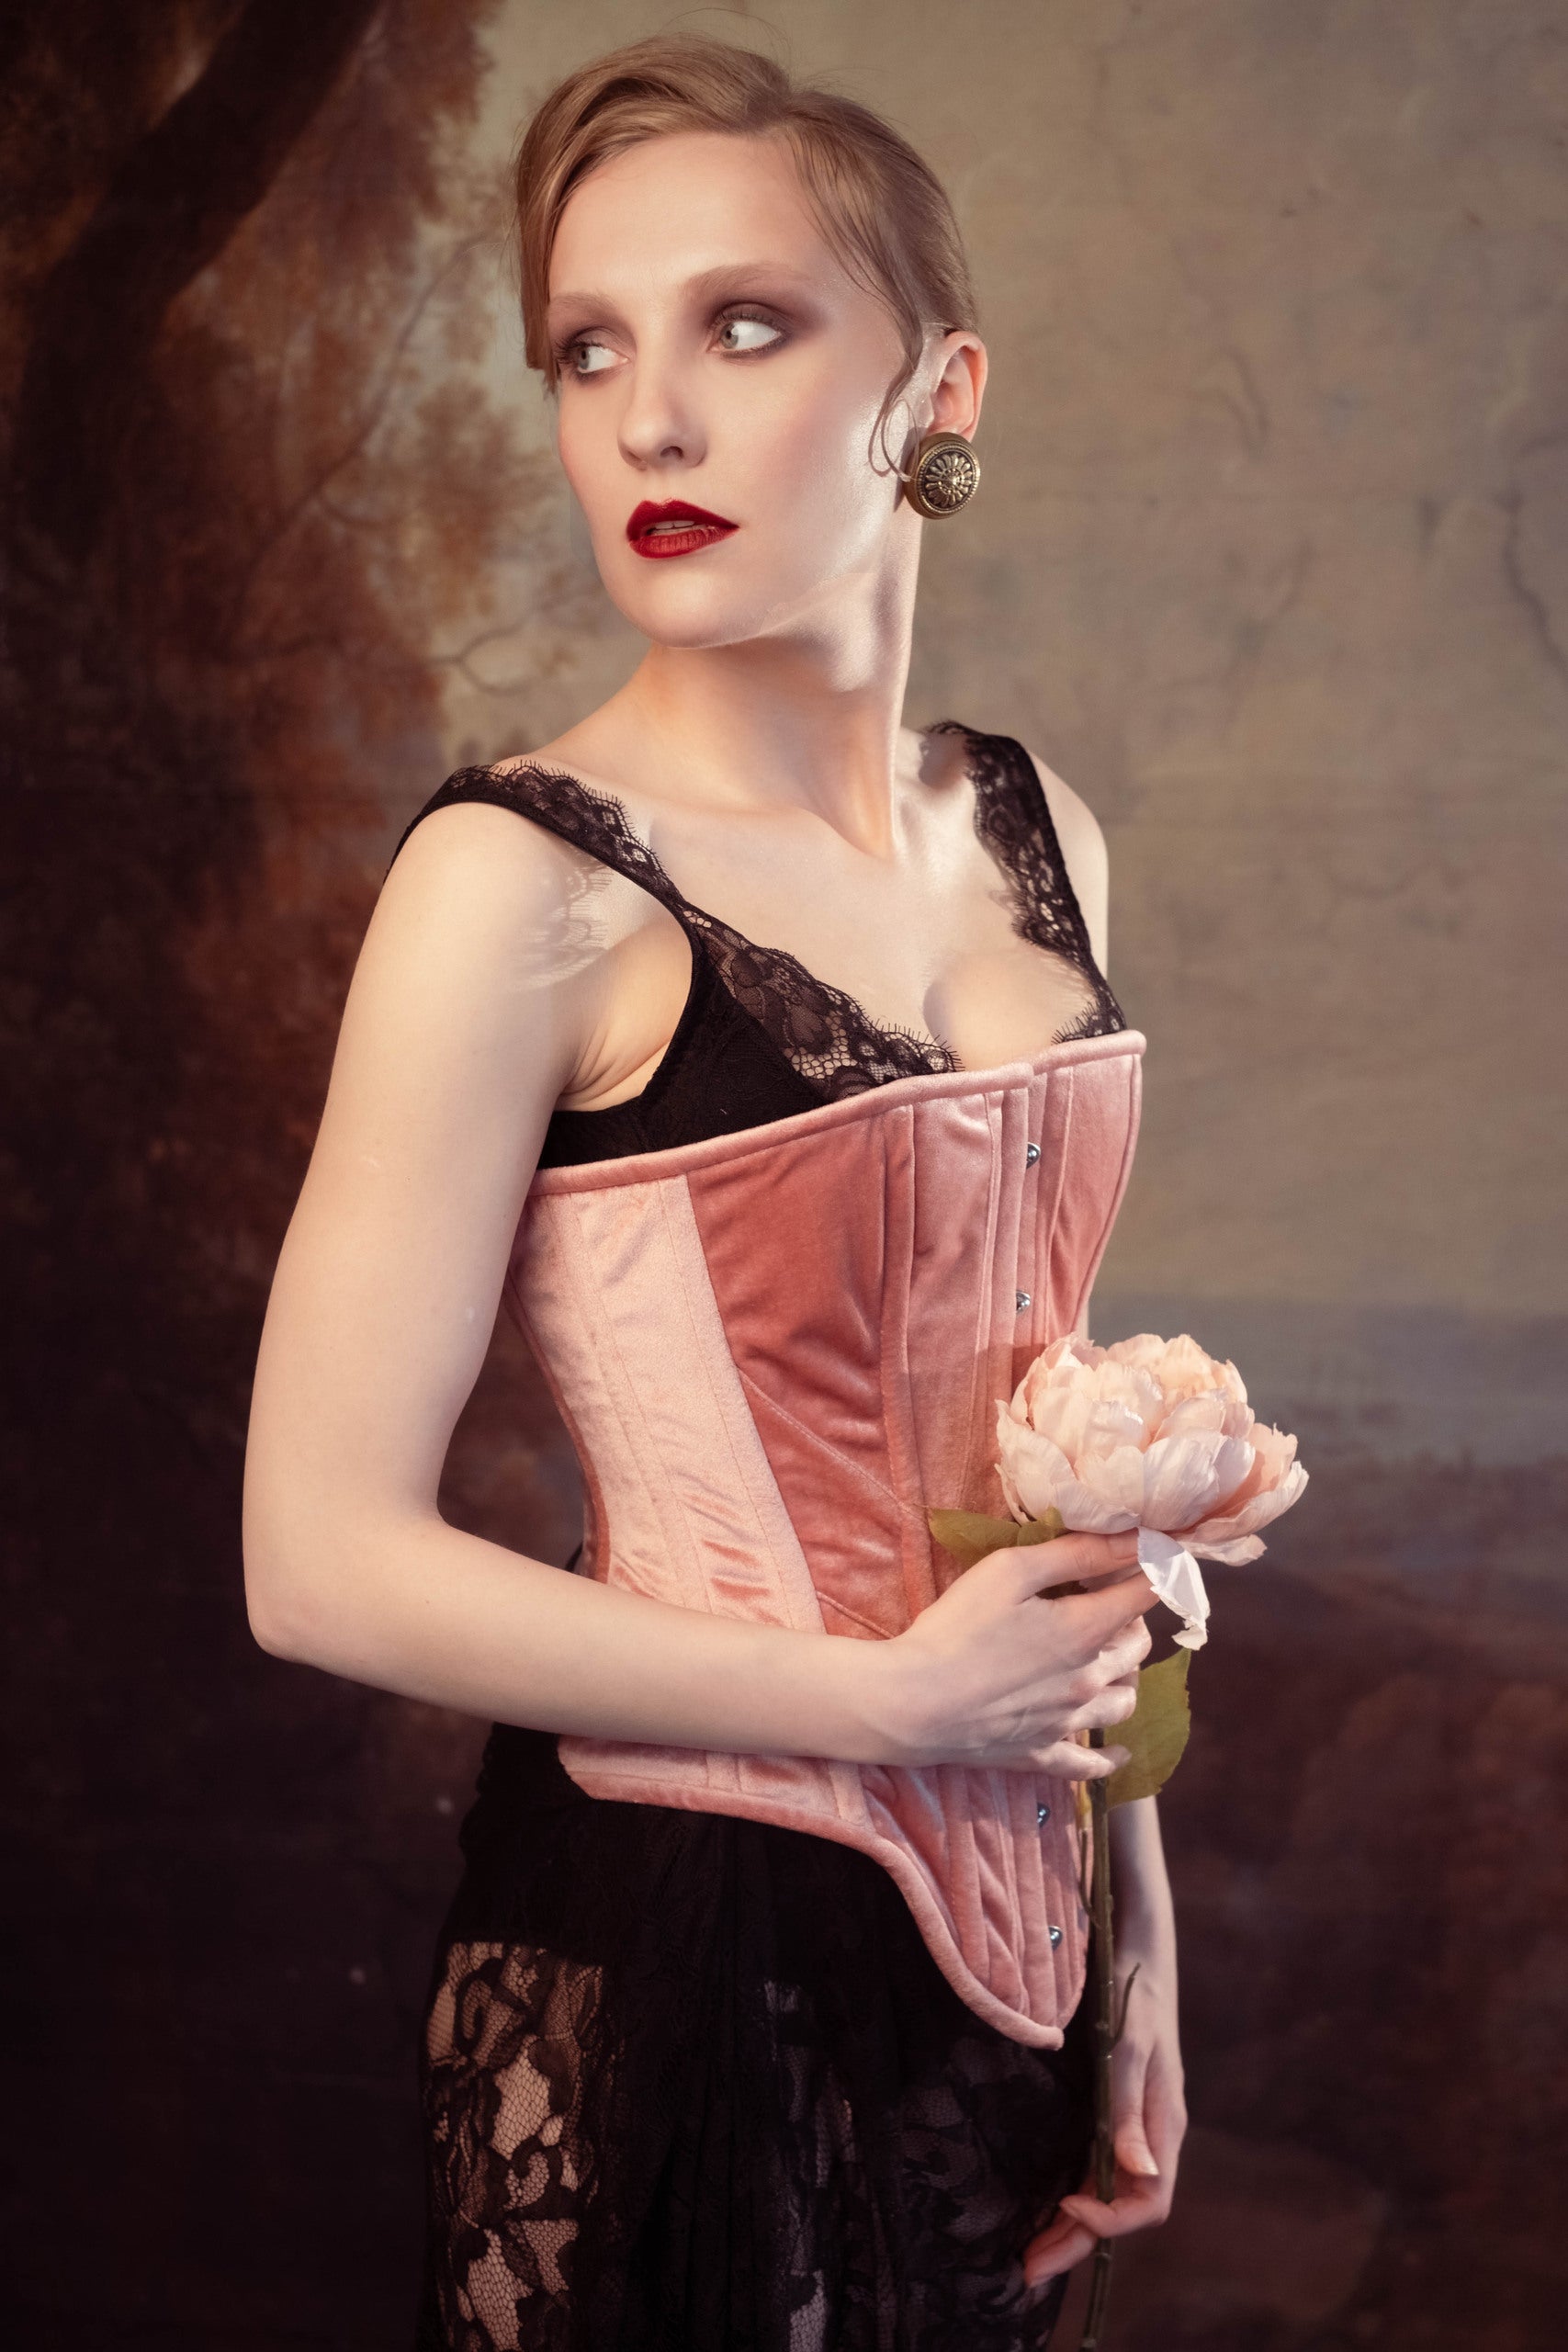 edwardian corset. I need to make a corset with a shape as good as this.